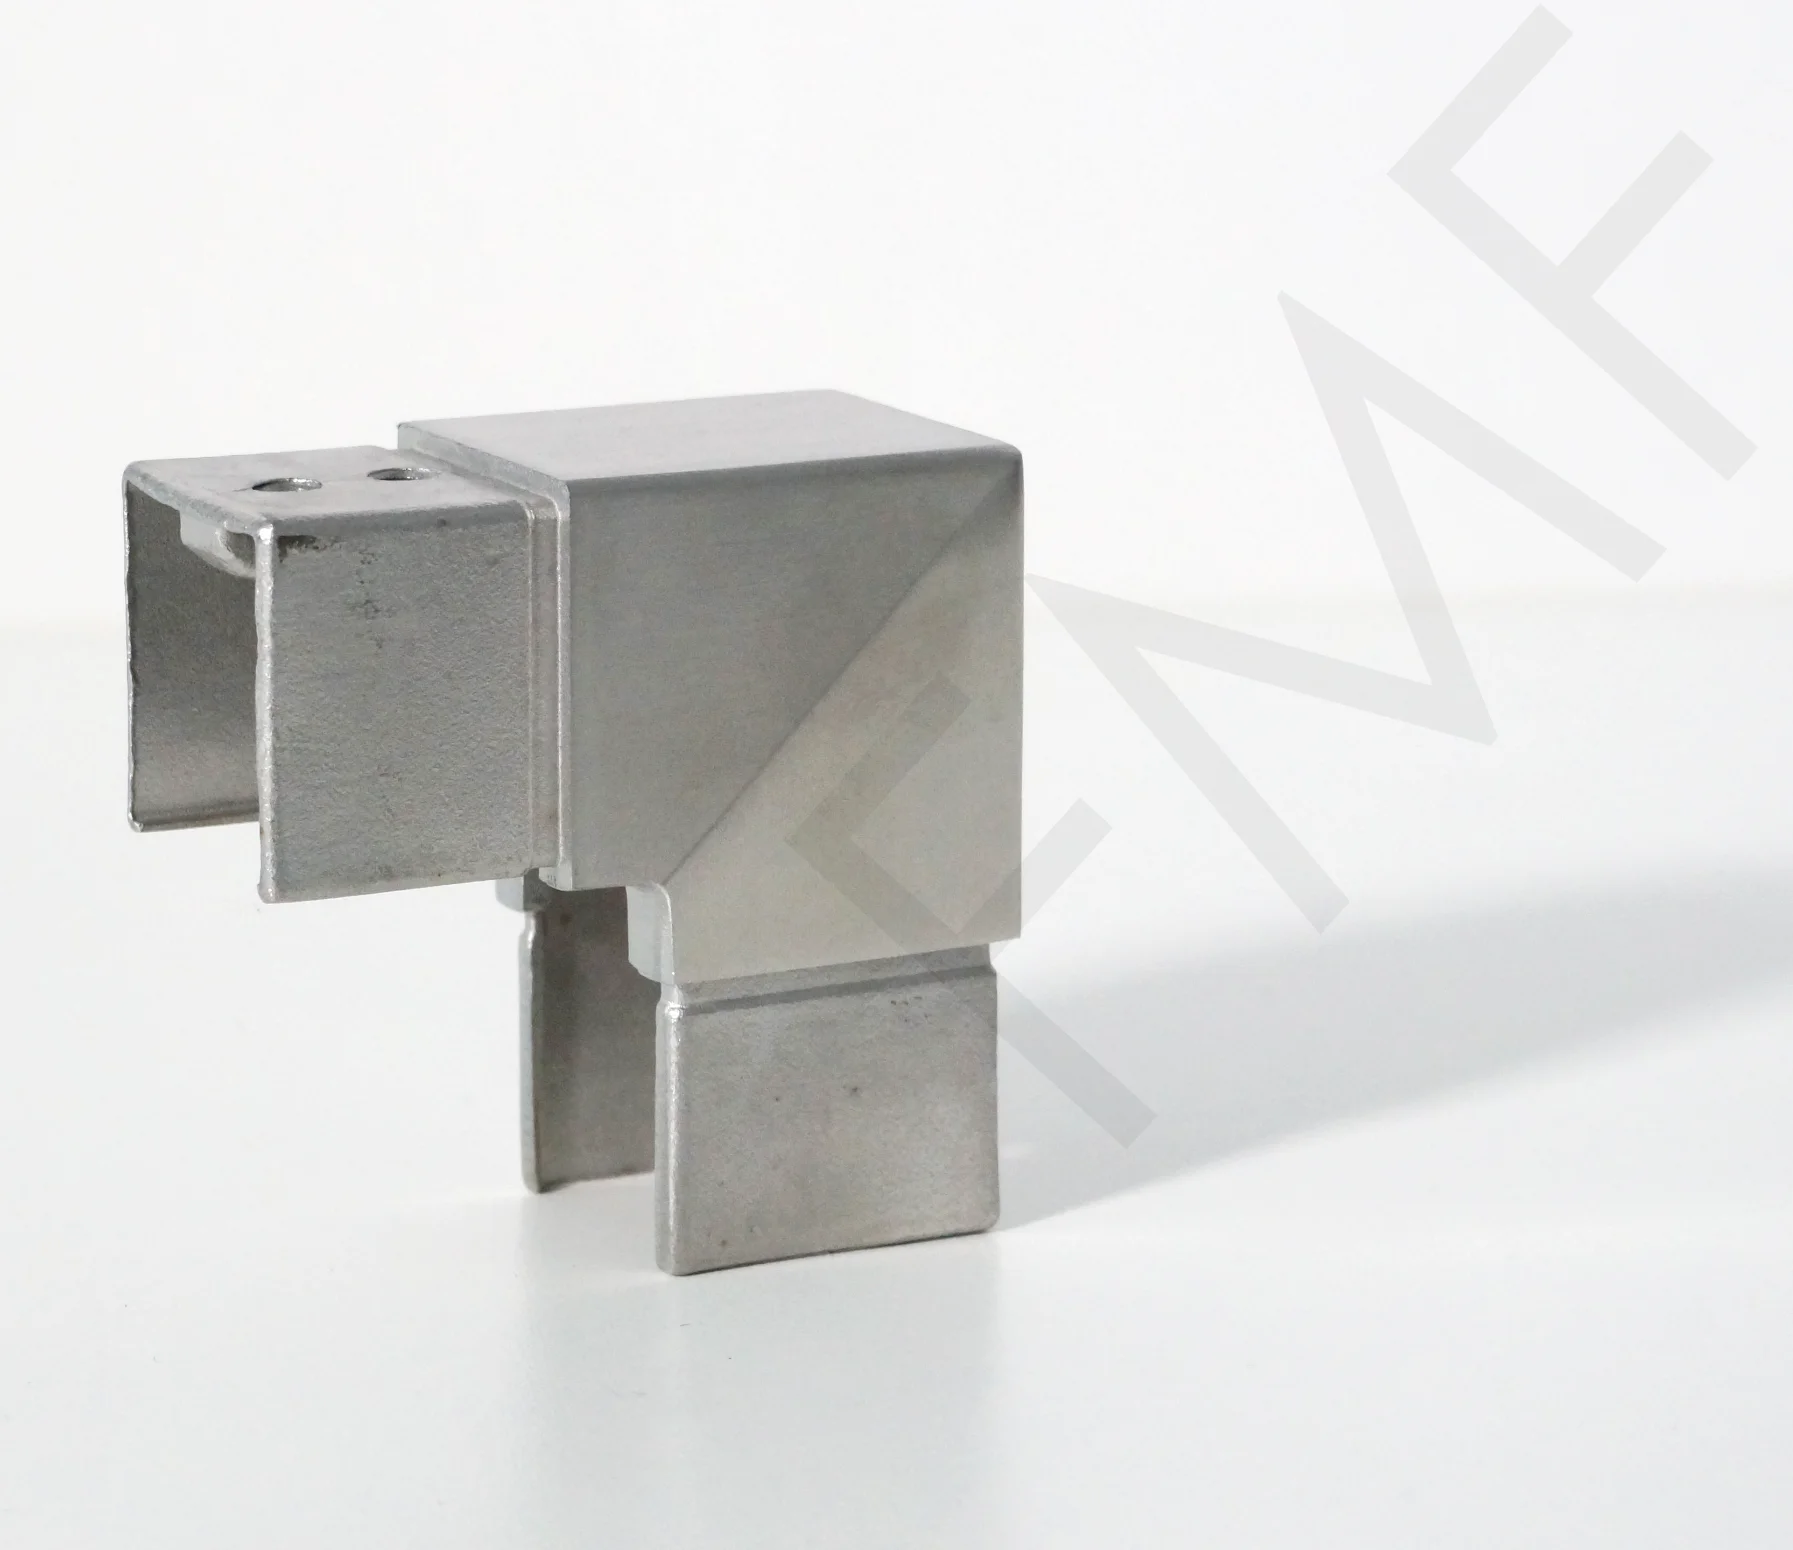 90° Vertical Elbow for 40x40mm Square Cap Handrail is used for connecting square cap handrails at a vertical angle of 90°. It is one of the most popular fitting items used for handrail installations in interior and exterior spaces. Manufactured for 316 Grade Stainless Steel, it comes with strength and durability to secure the vertical connection of square cap handrails. Its sleek design and Stainless Steel finish give a sophisticated look to your handrails. It is ideal to use at residential and commercial properties for staircases, porches, balconies, etc. They are easy to install and use. It creates a 90° vertical fit on the square handrail. Choose from a wide range of railing hardware products available at FMF Glass Hardware to accomplish your architectural projects.